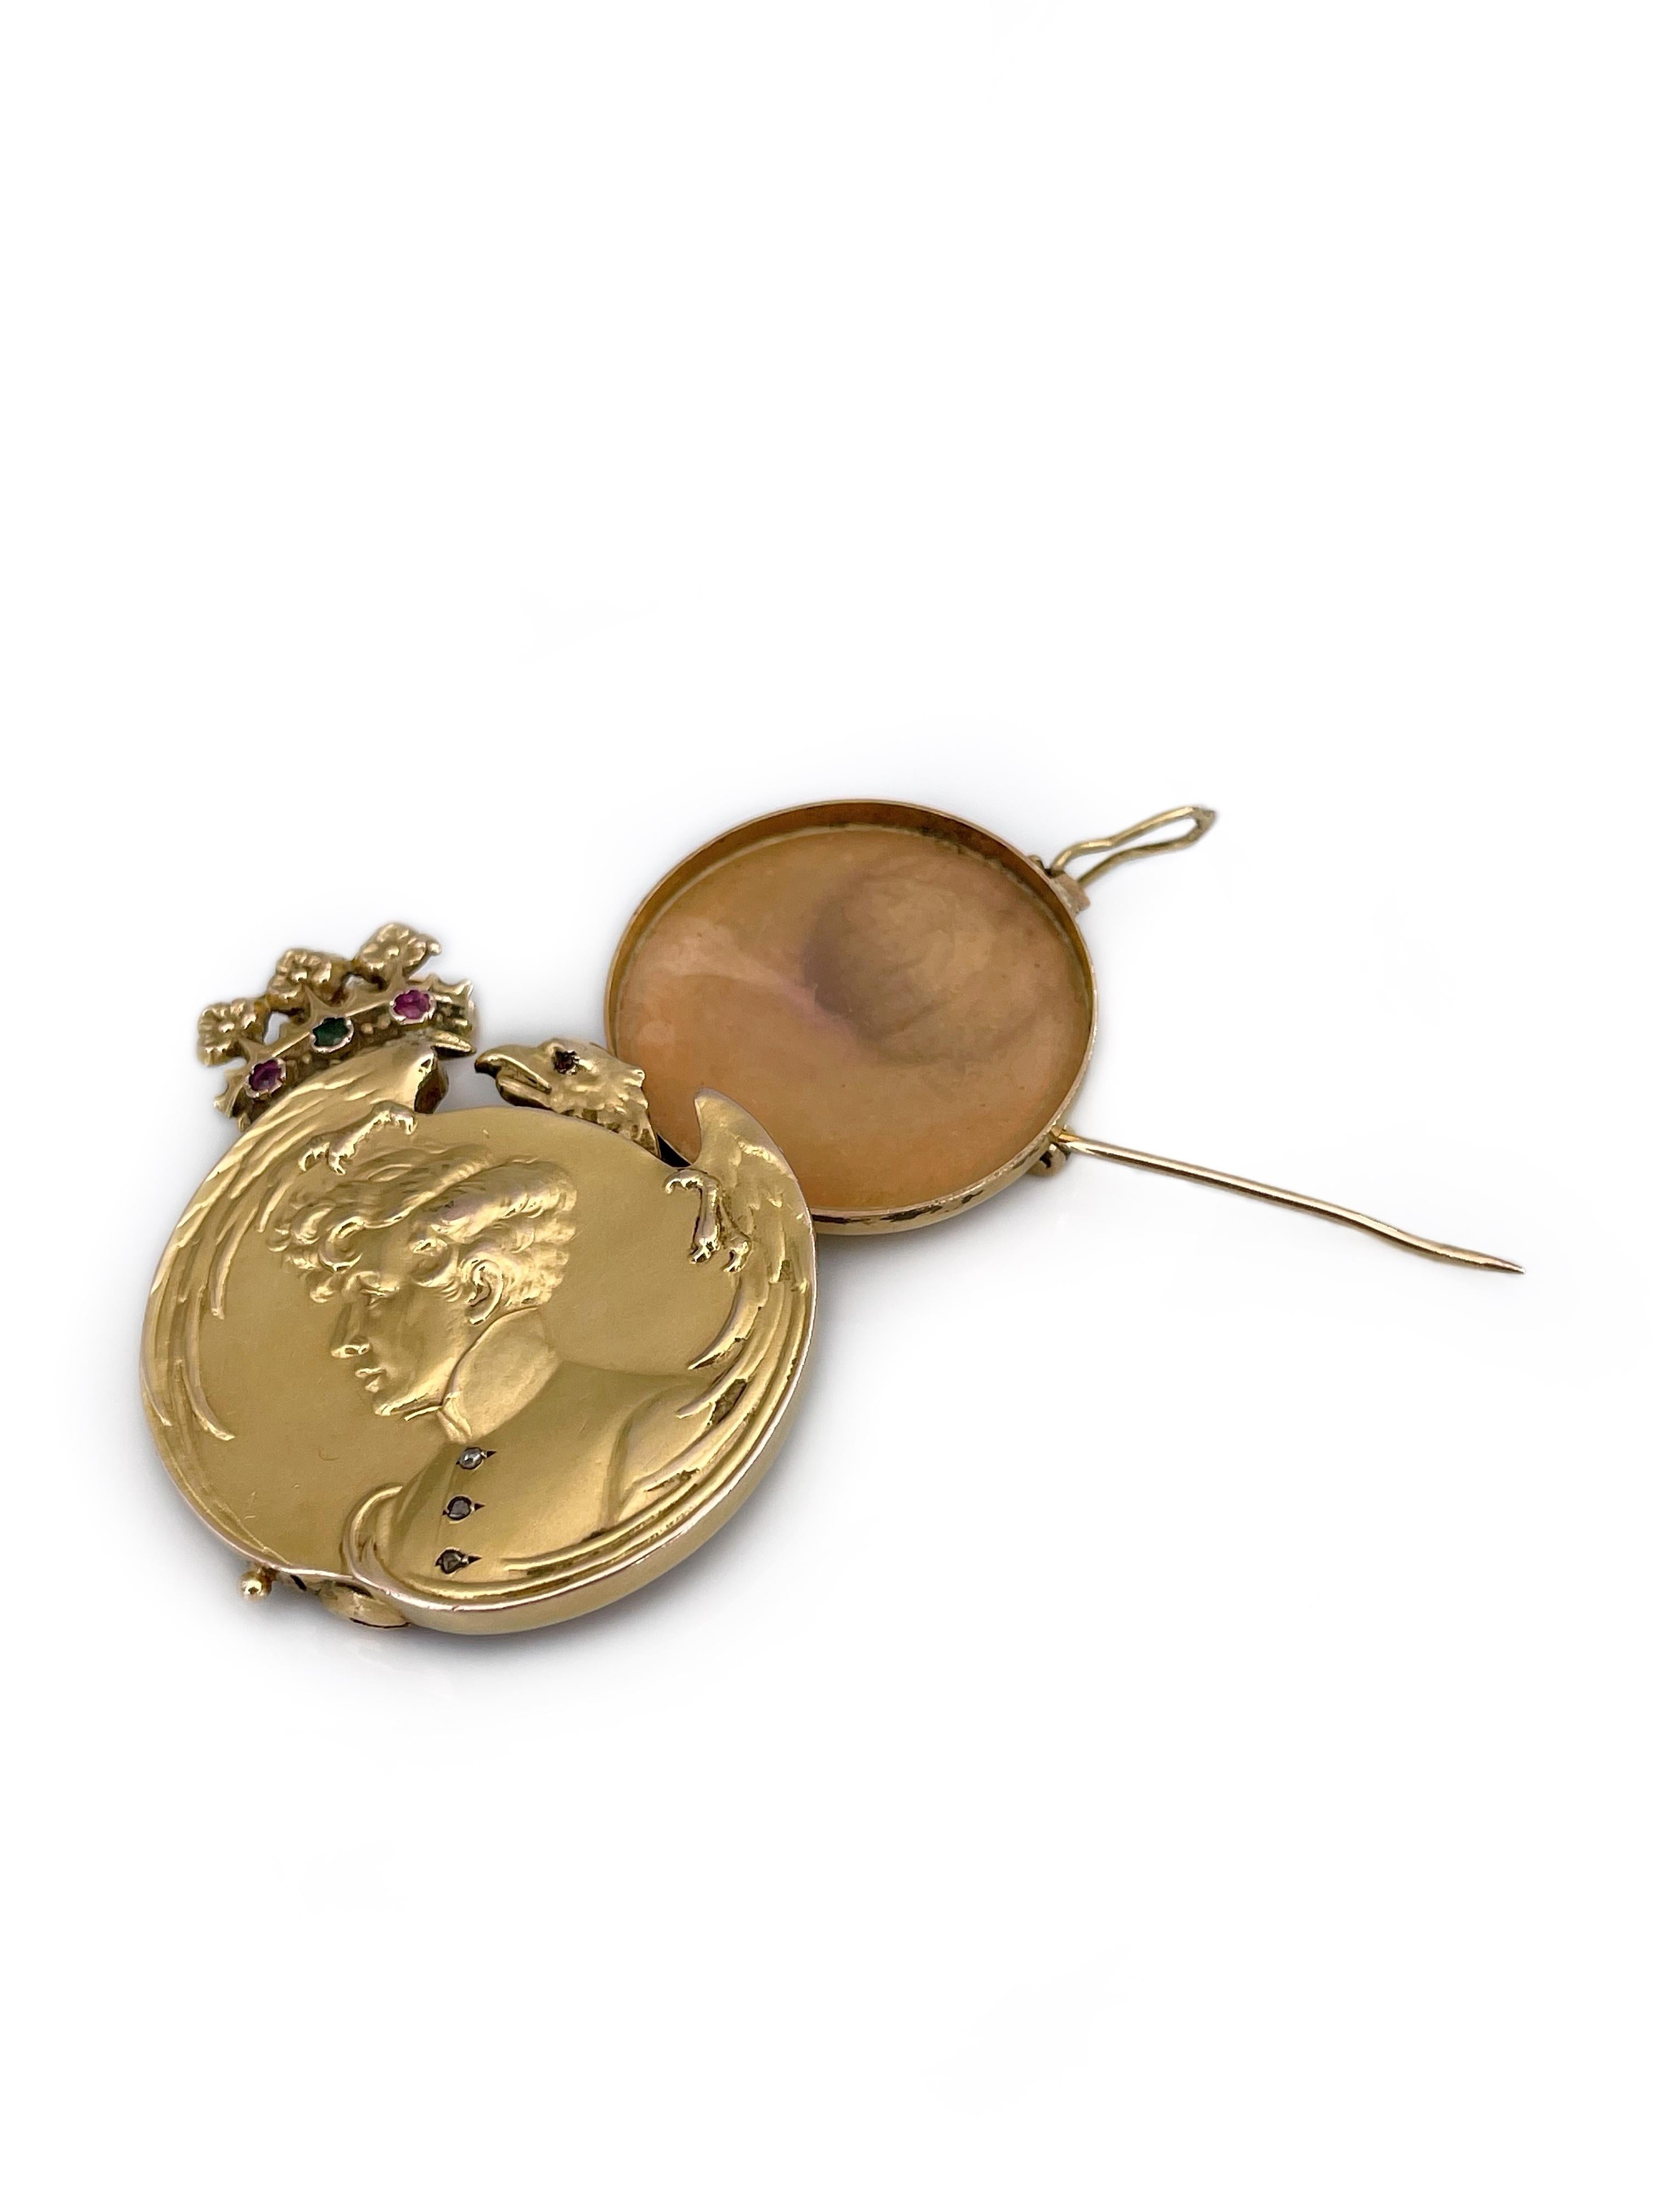 This is an amazing Art Nouveau locket pendant-brooch. The piece is crafted in 14K yellow gold. It depicts a portrait of Napoleon II (son of Napoleon Bonaparte), an eagle and a crown. The piece is adorned with rose cut diamonds and colorful garnets.